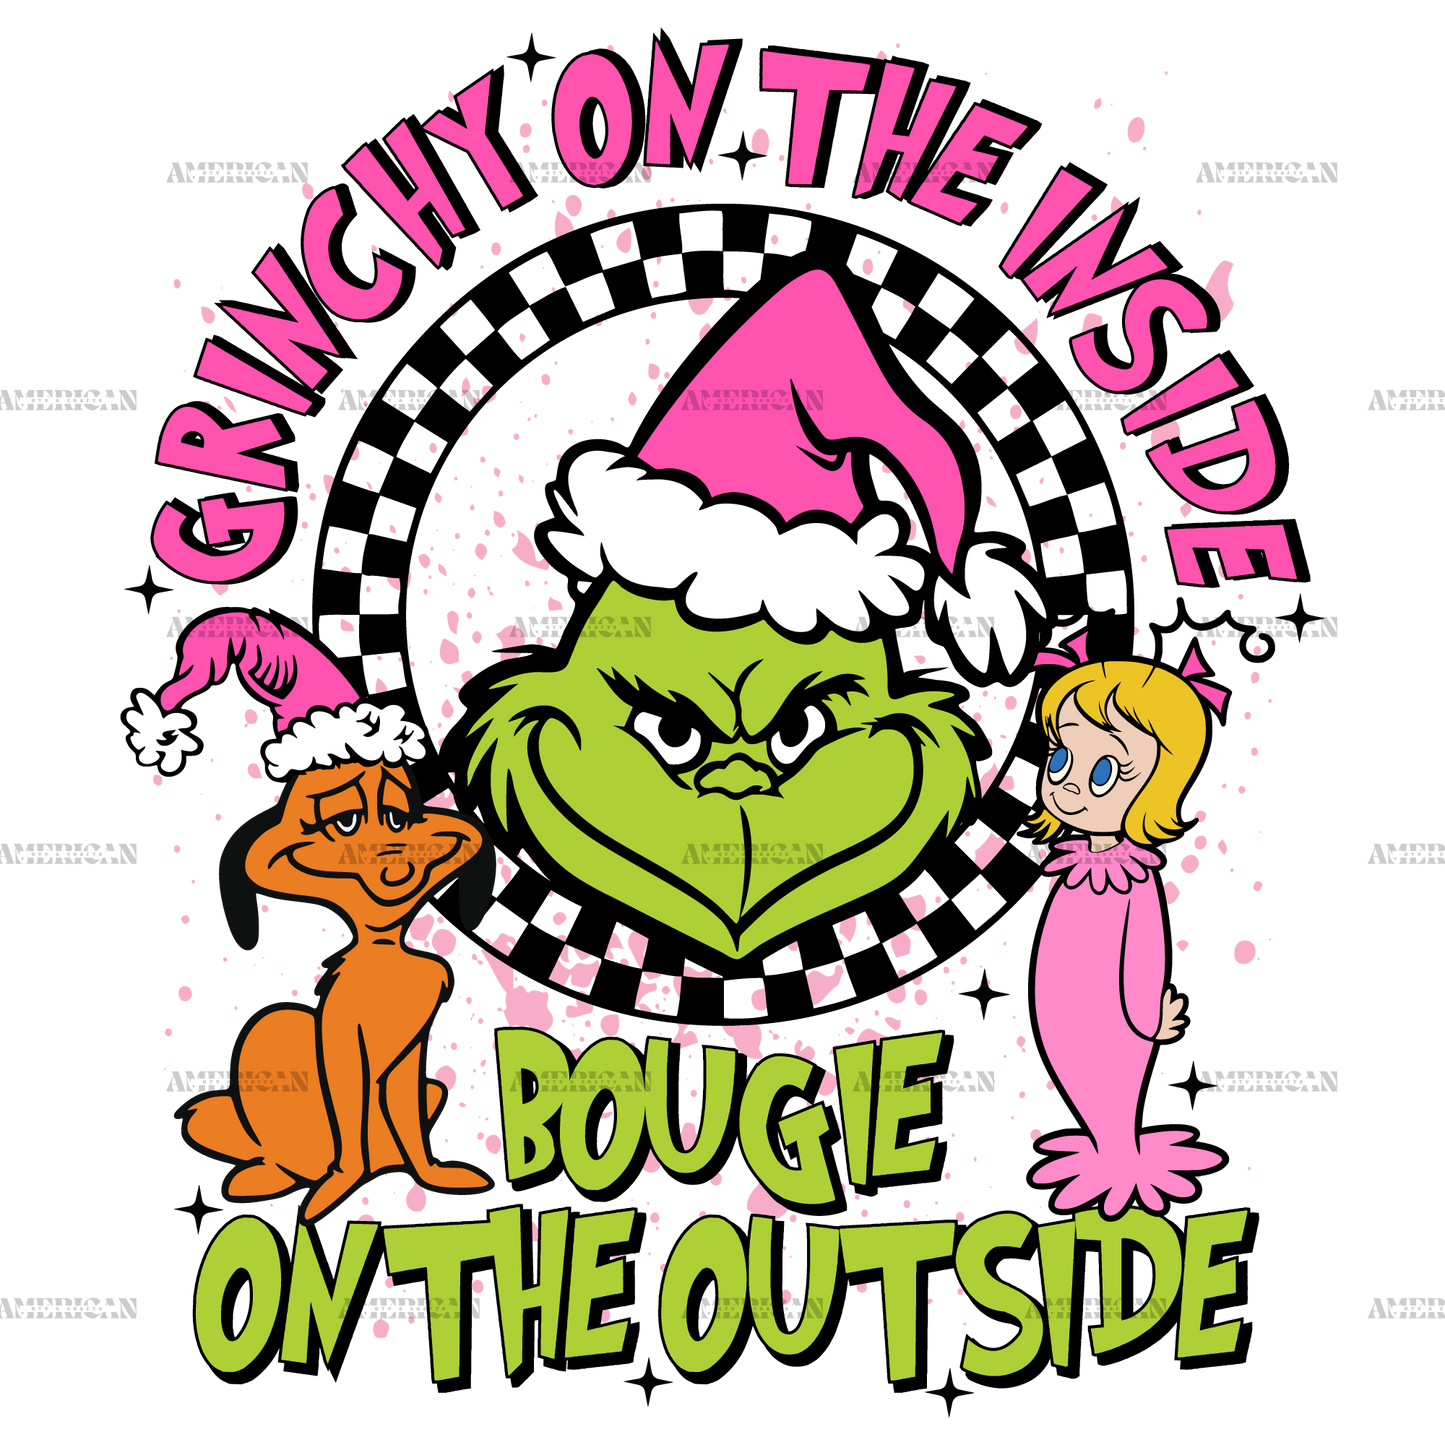 Grinchy On The Inside Bougie On The Outside Tumbler - Icestork